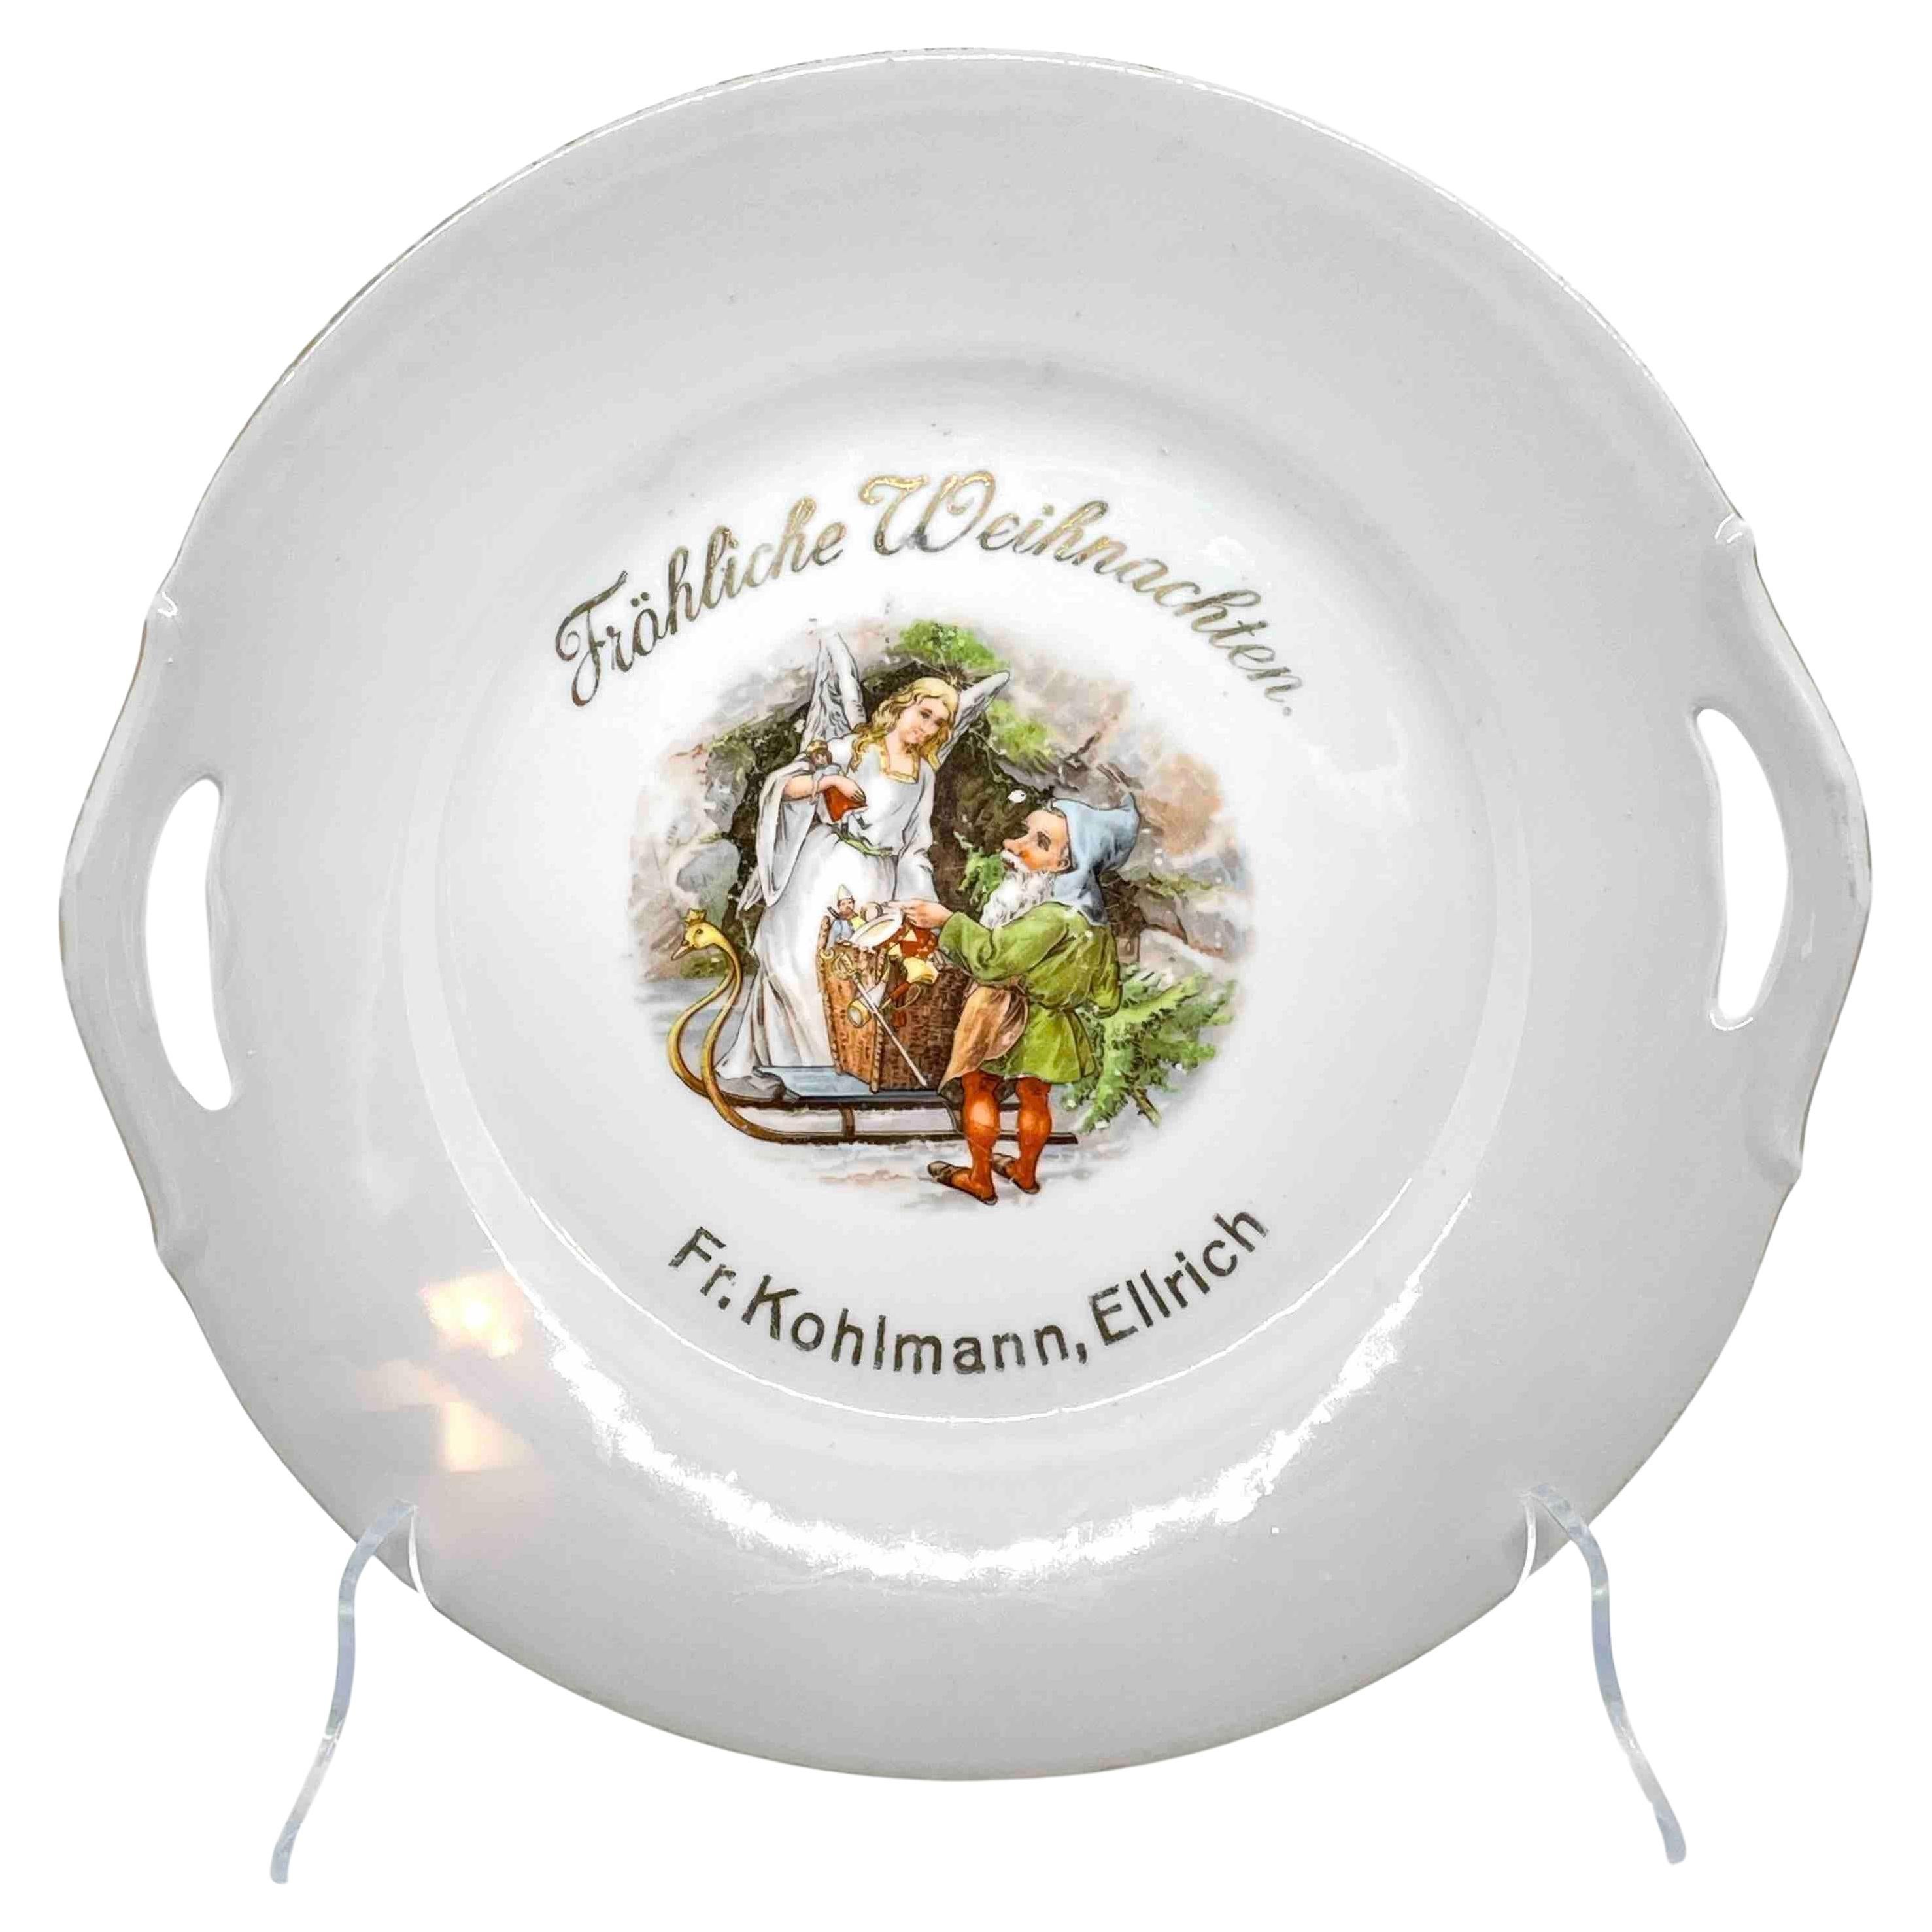 Santa Claus Cookies Christmas Plate with Gnome and Angel Motif, Antique German For Sale